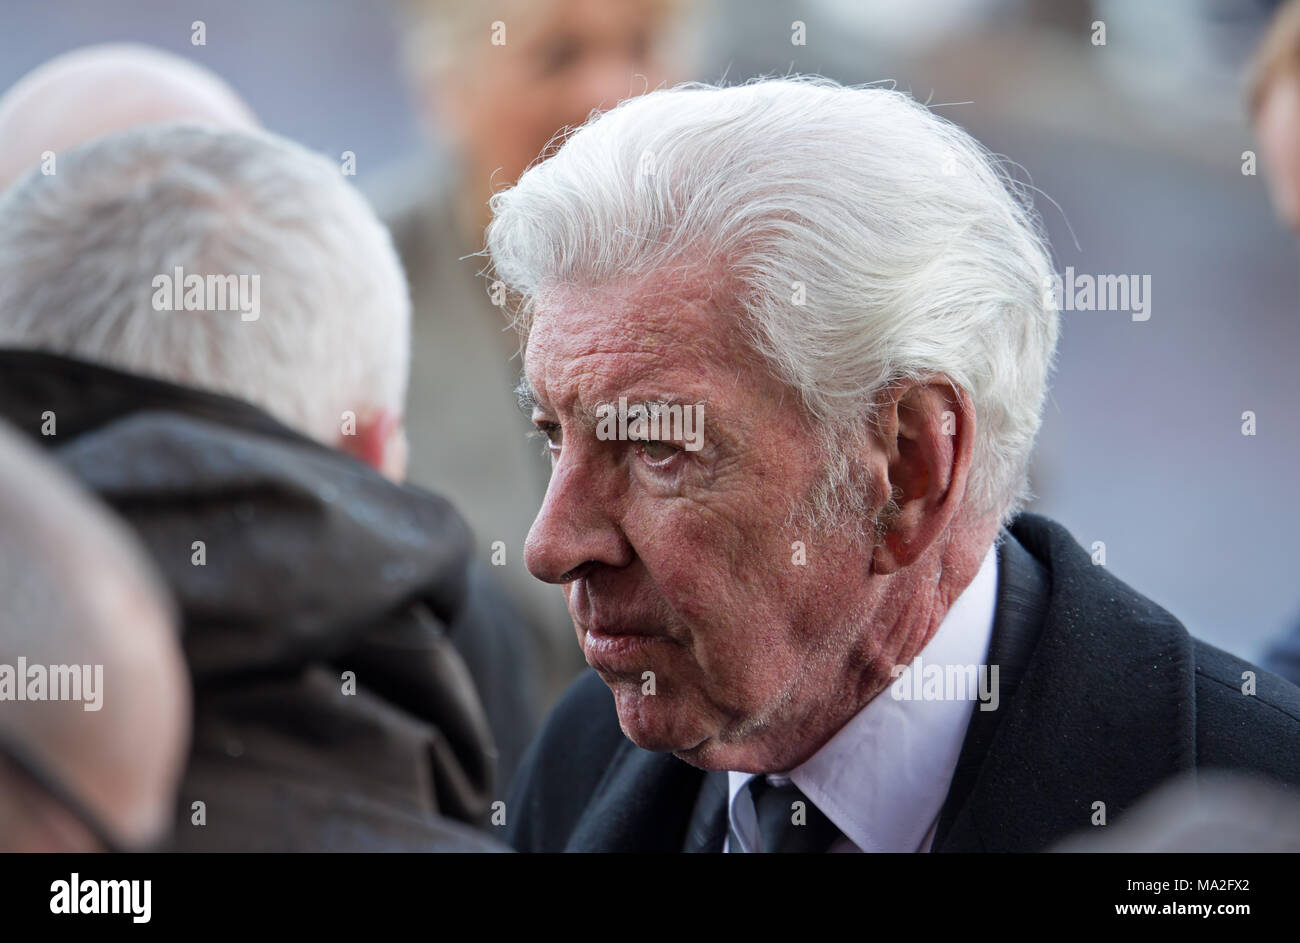 Tom O'connor Comedian High Resolution Stock Photography and Images - Alamy